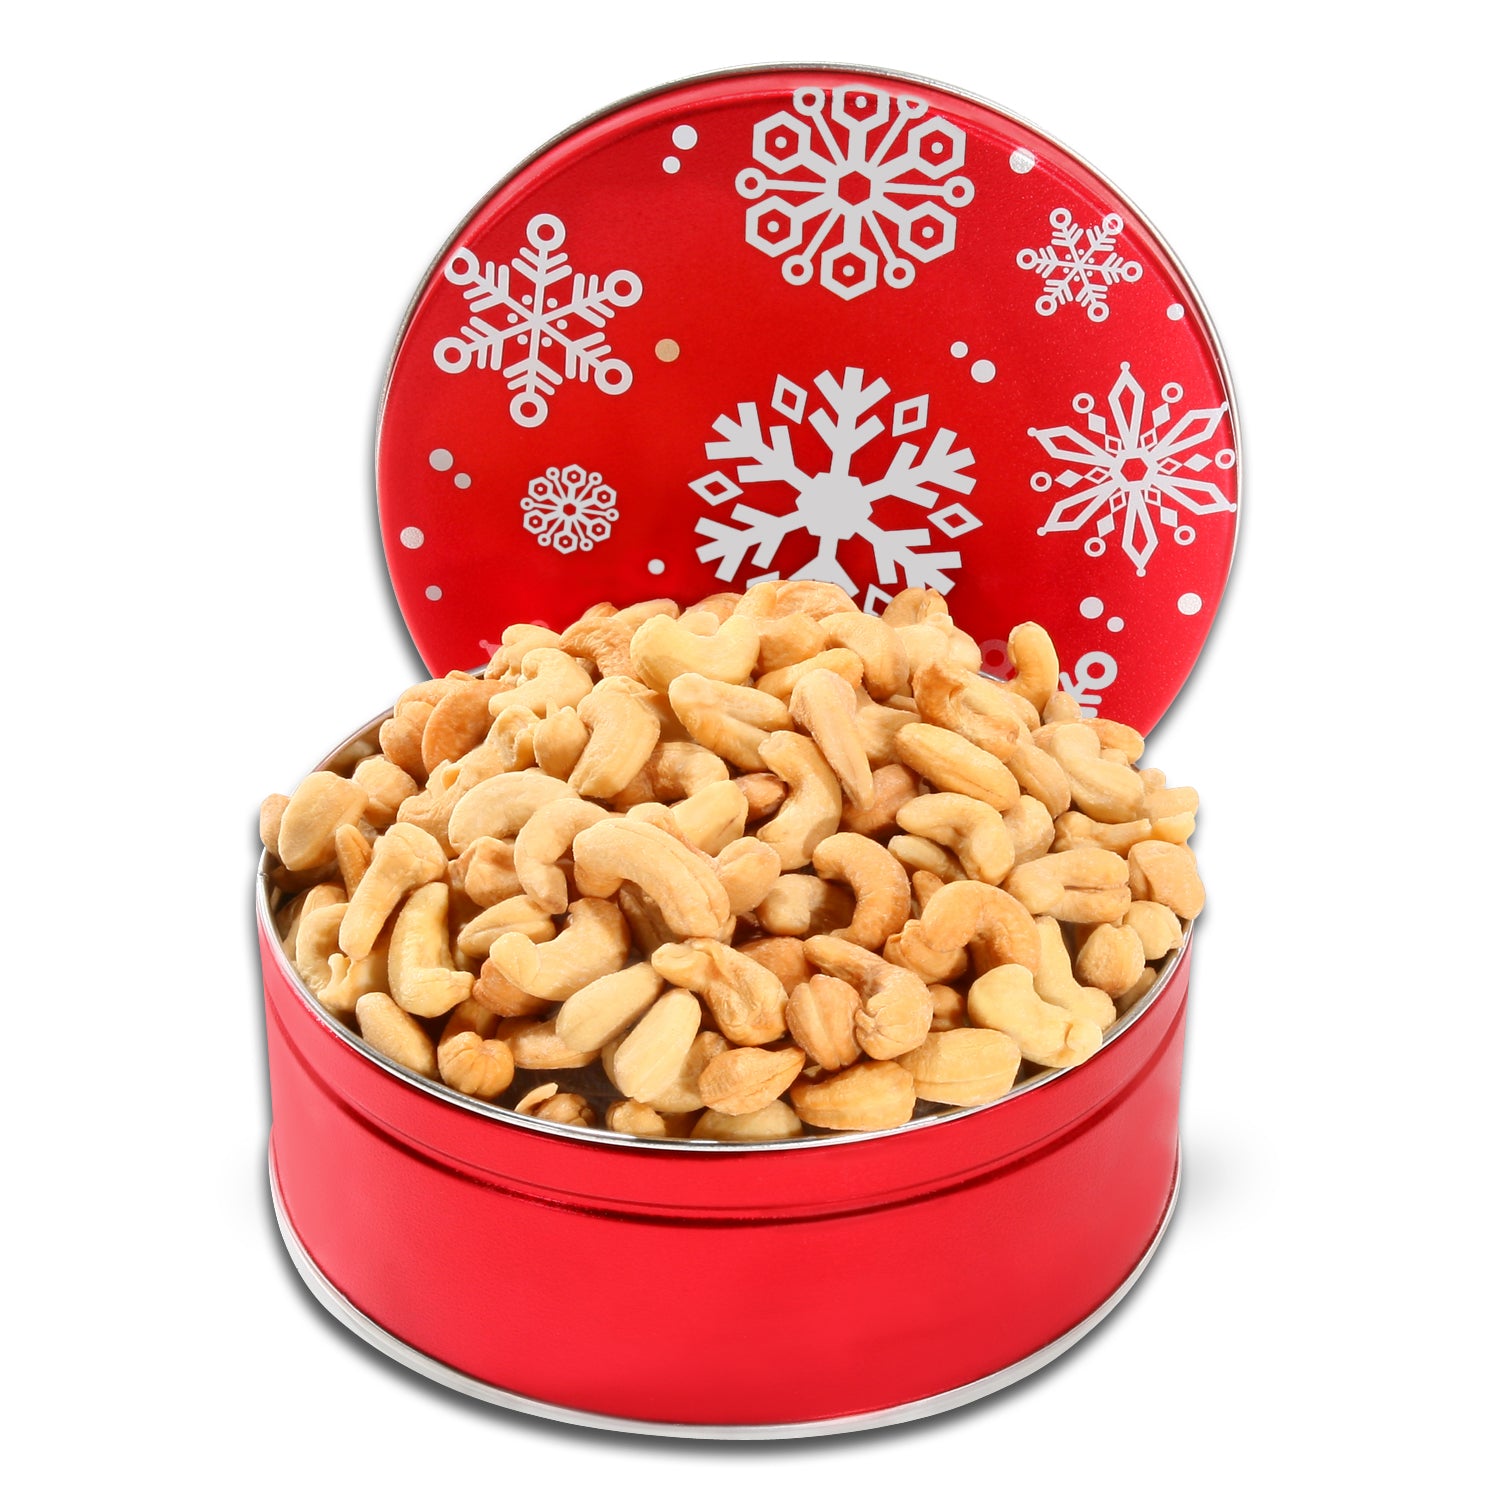 1lb cashews in red tin with white snowflakes on lid